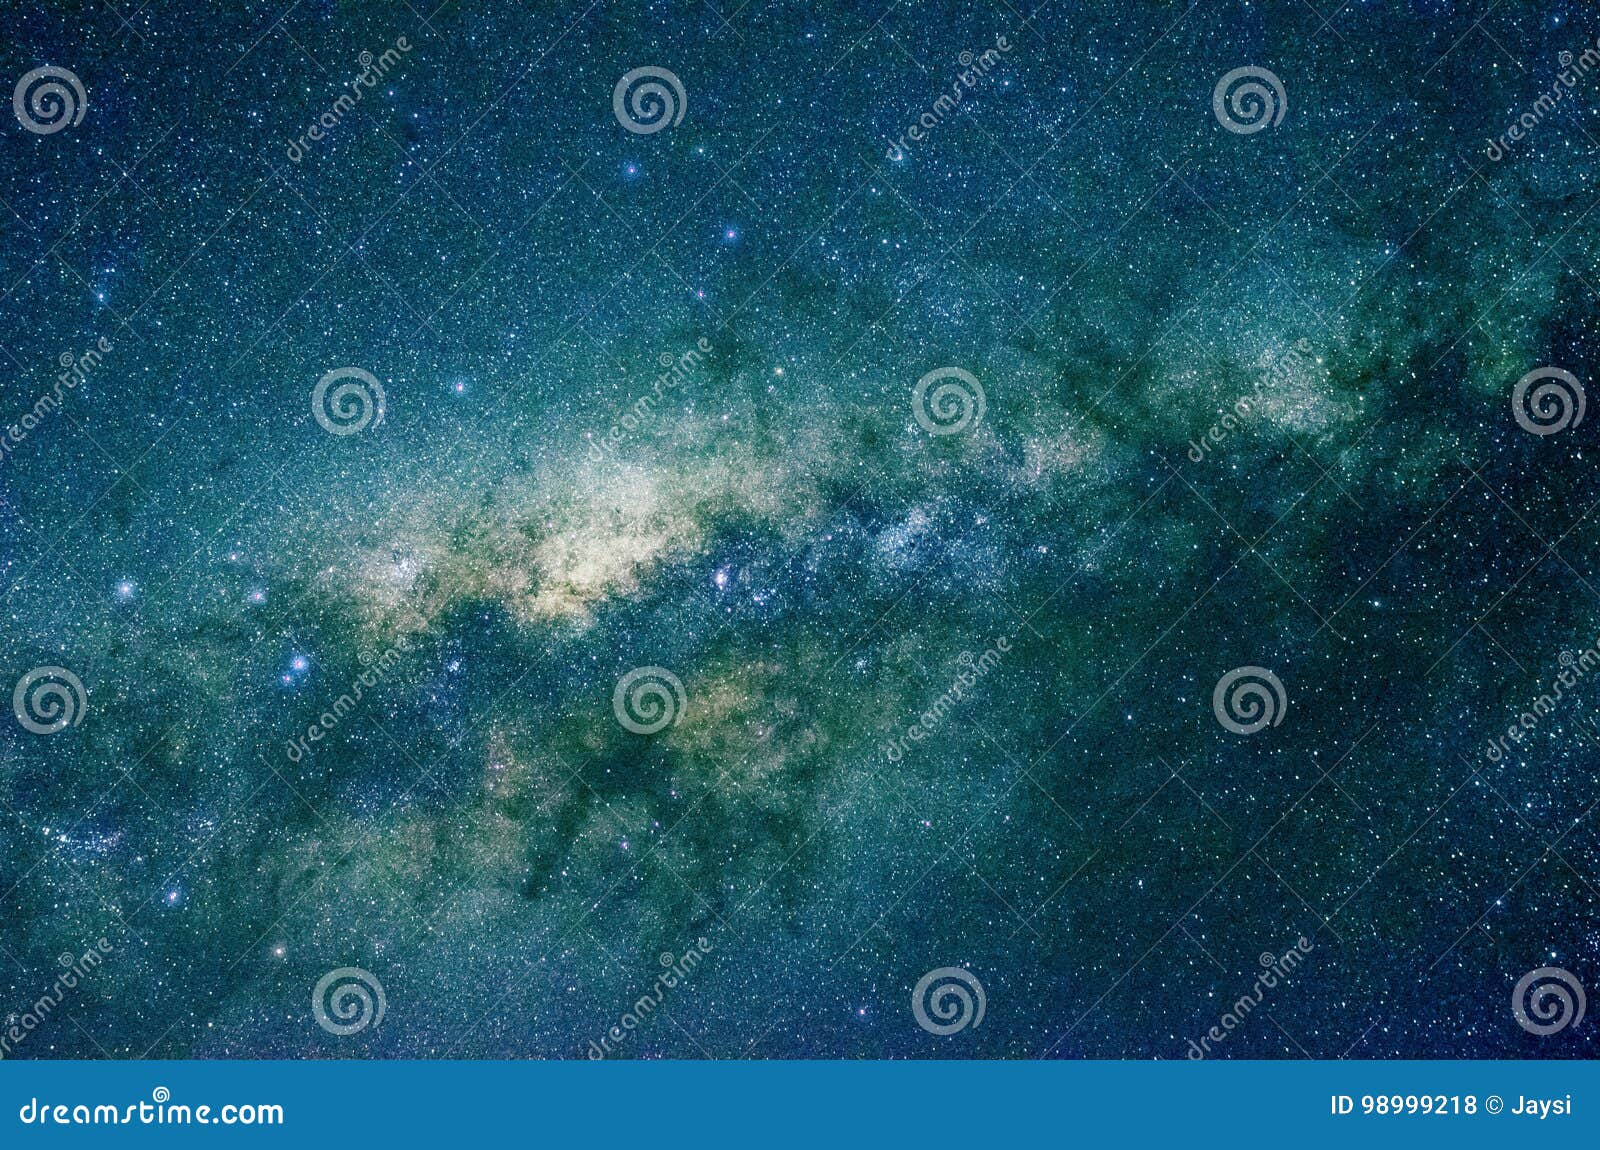 stars and galaxy outer space sky night universe background